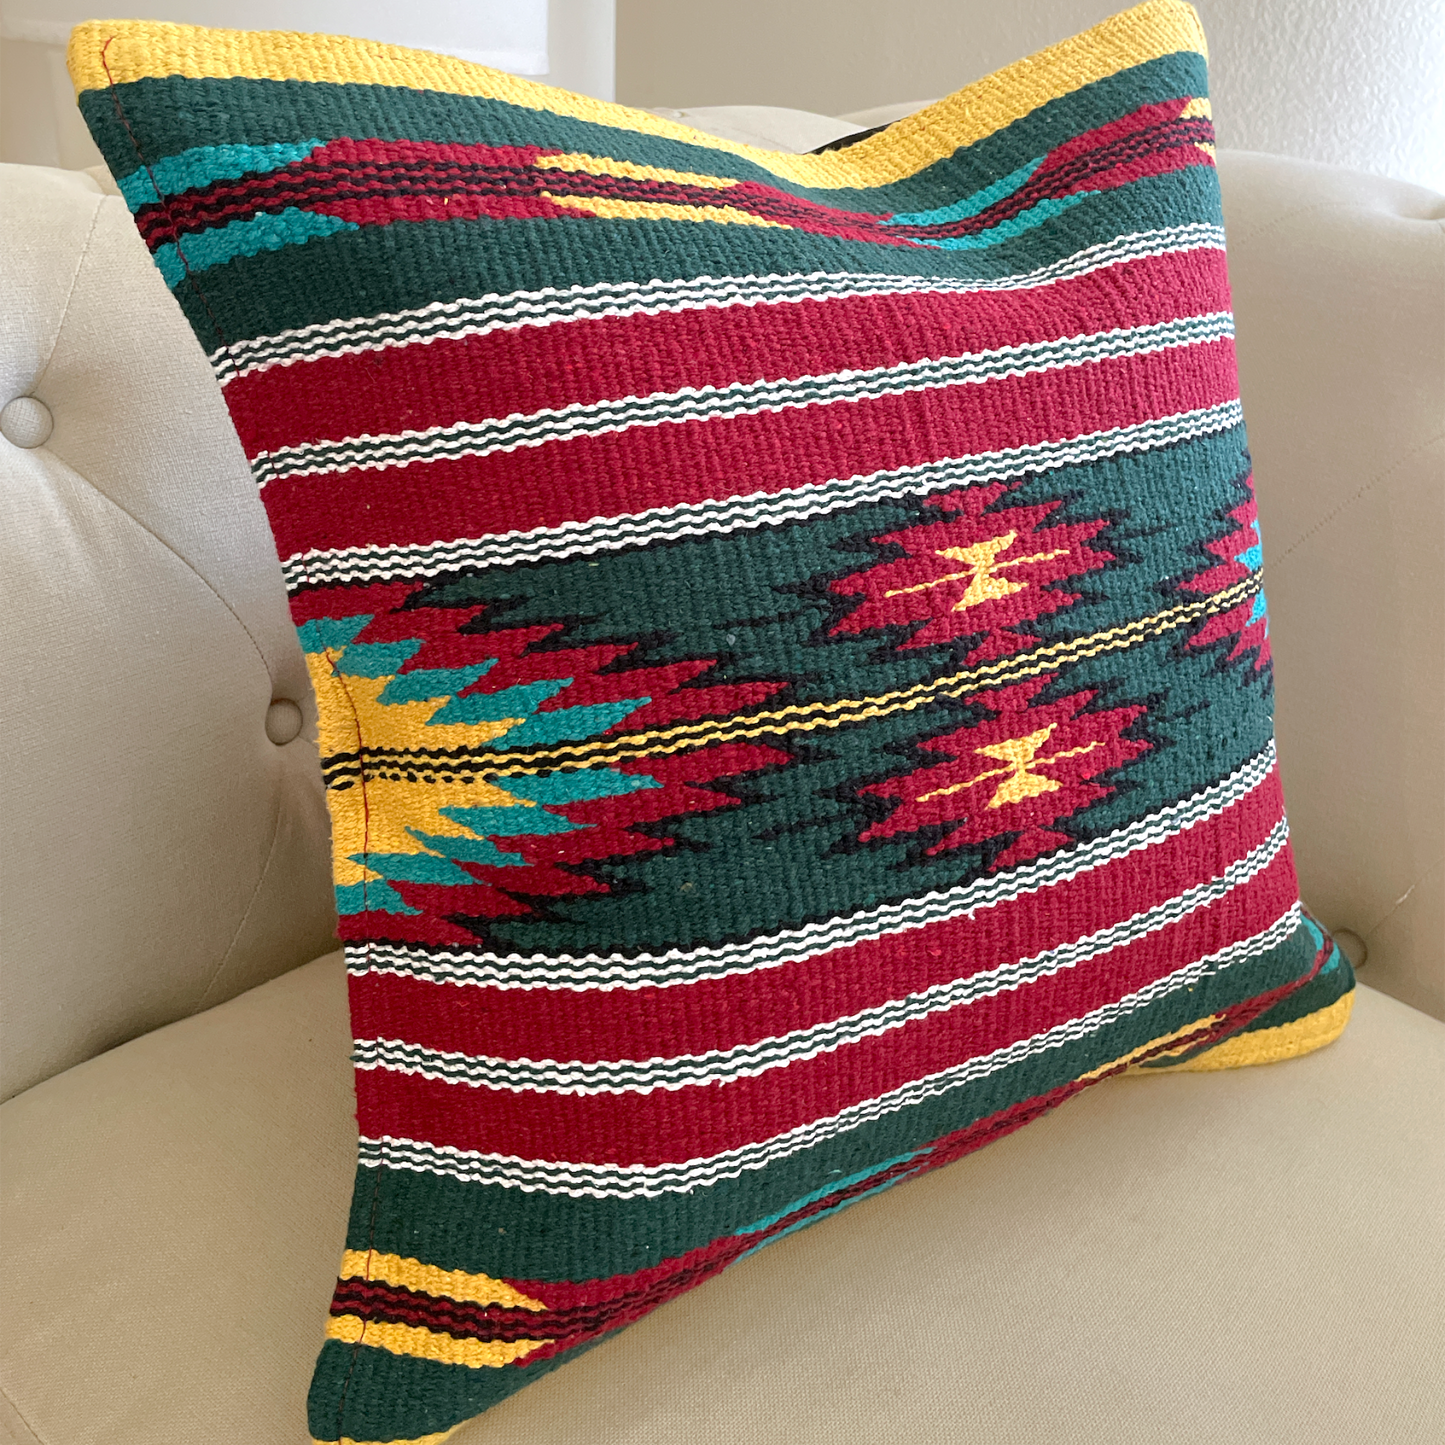 Handwoven Zapotec Pillow Cover Style 6